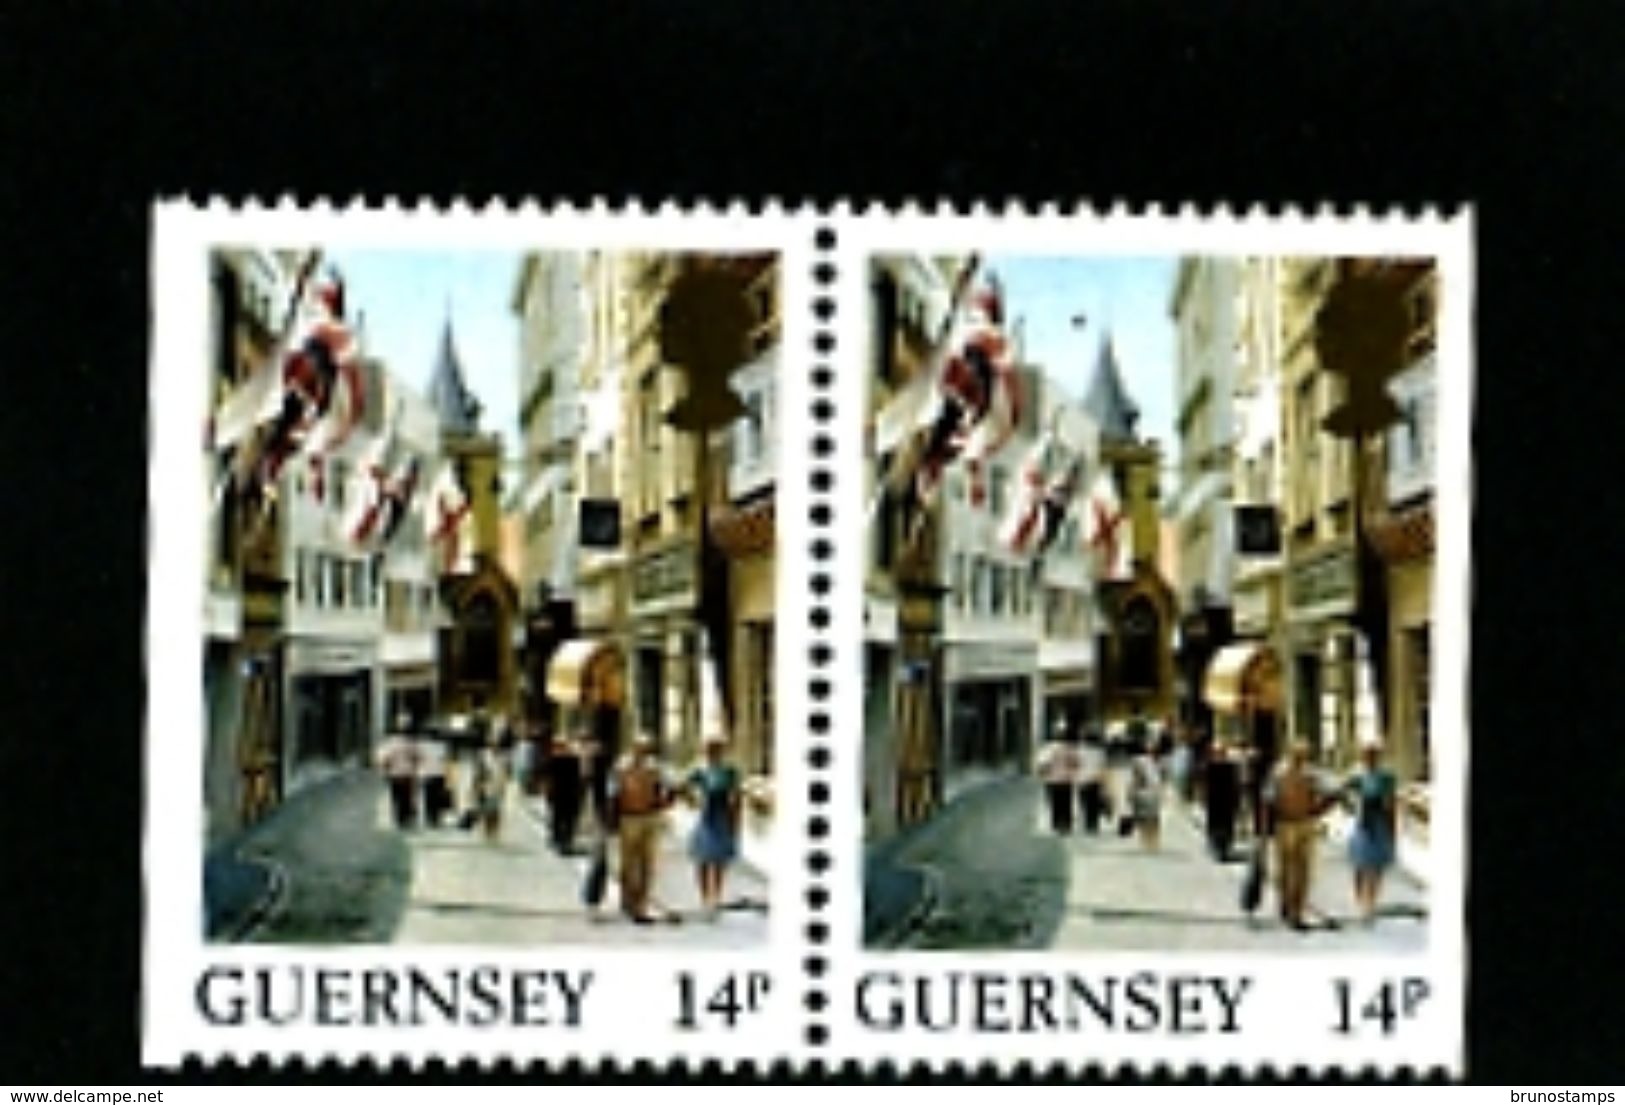 GUERNSEY - 1984  VIEWS  14p  PAIR  EX BOOKLET  IMPERF  SIDES  MINT NH - Guernsey